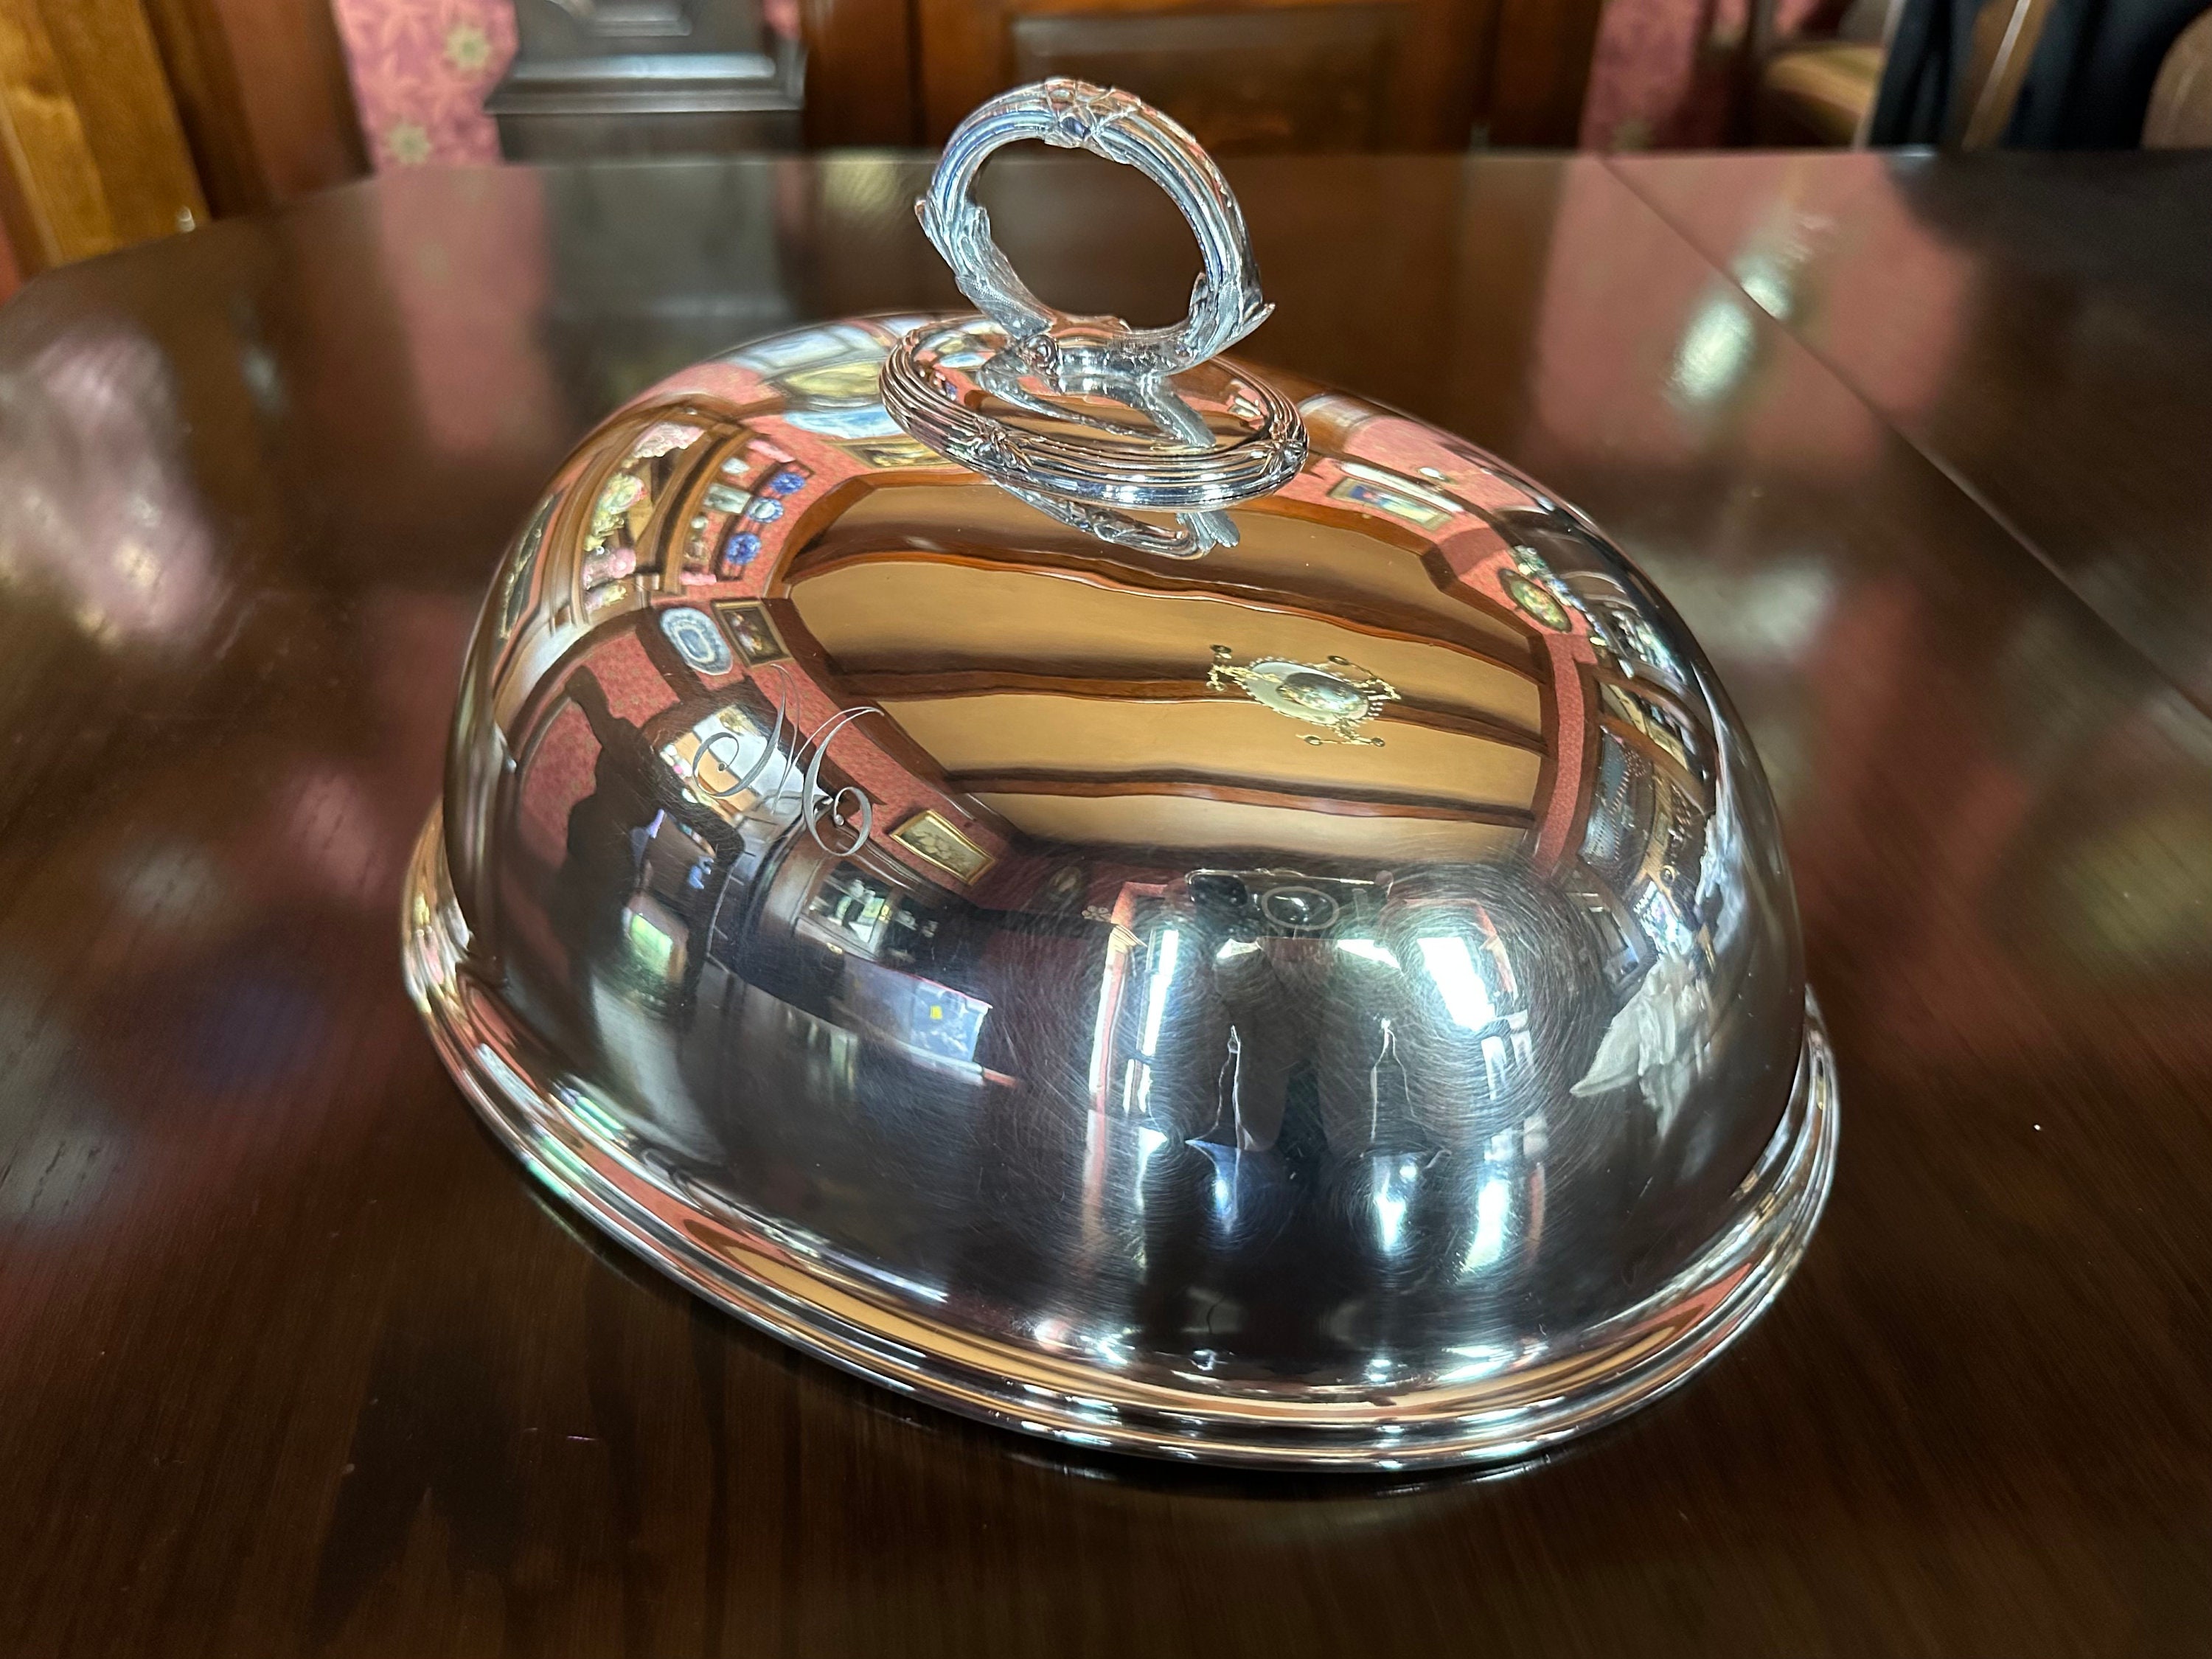 Cabilock Stainless Steel Restaurant Cloche Serving Dish Food Cover Dome  Plate Covers for Steak Cake Appetizer Plate to Keep Food Warm (7.86x3.93  inch)